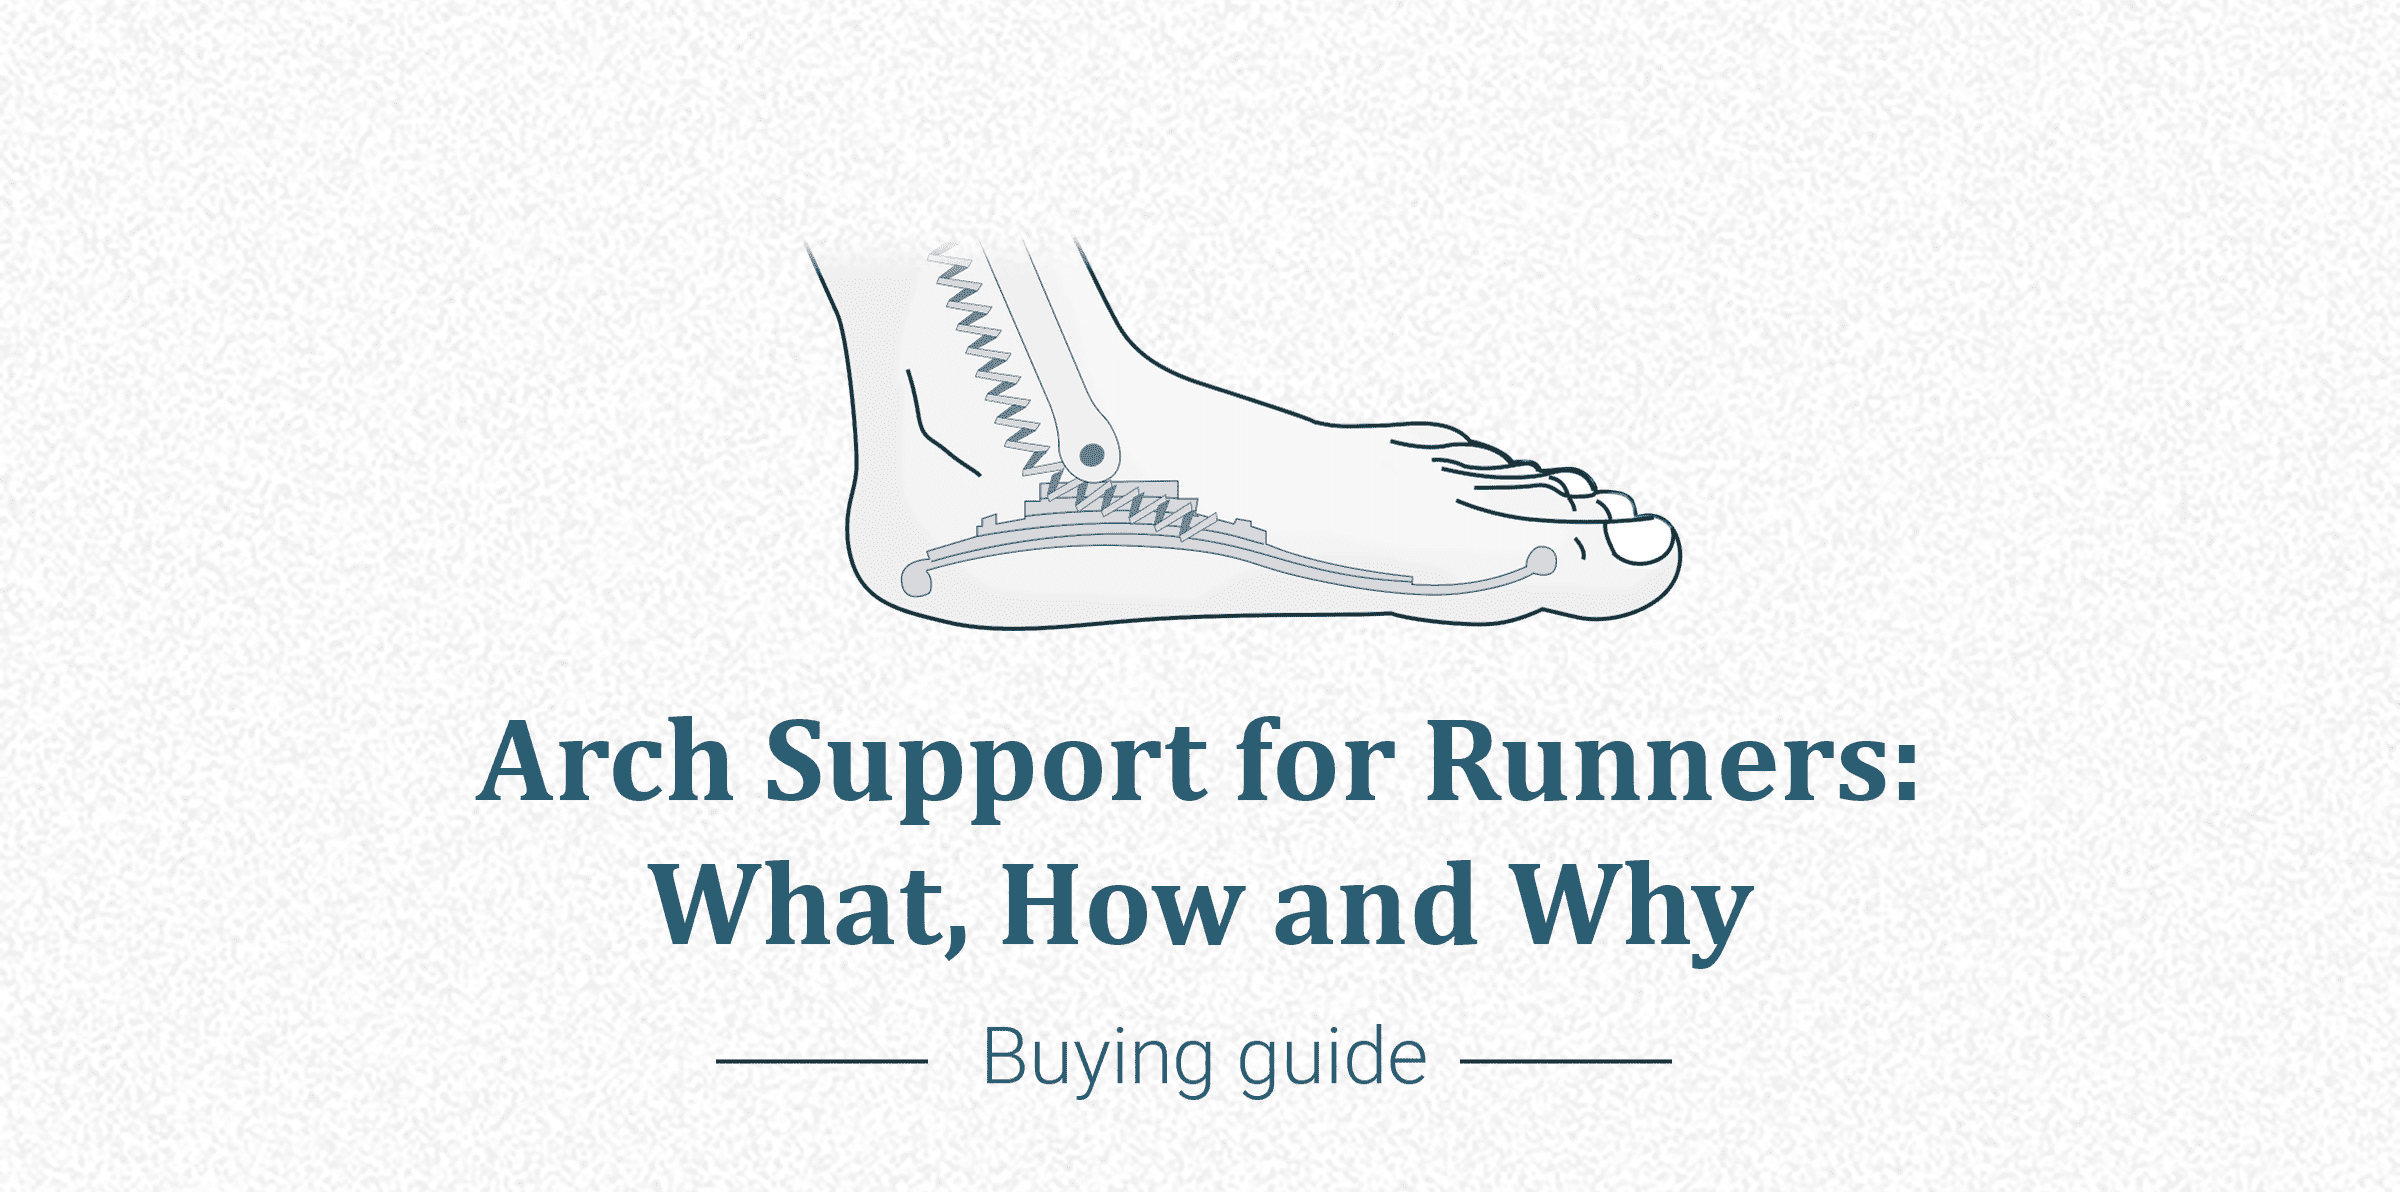 Buyer's Guide: Selecting the Right Support Cushion